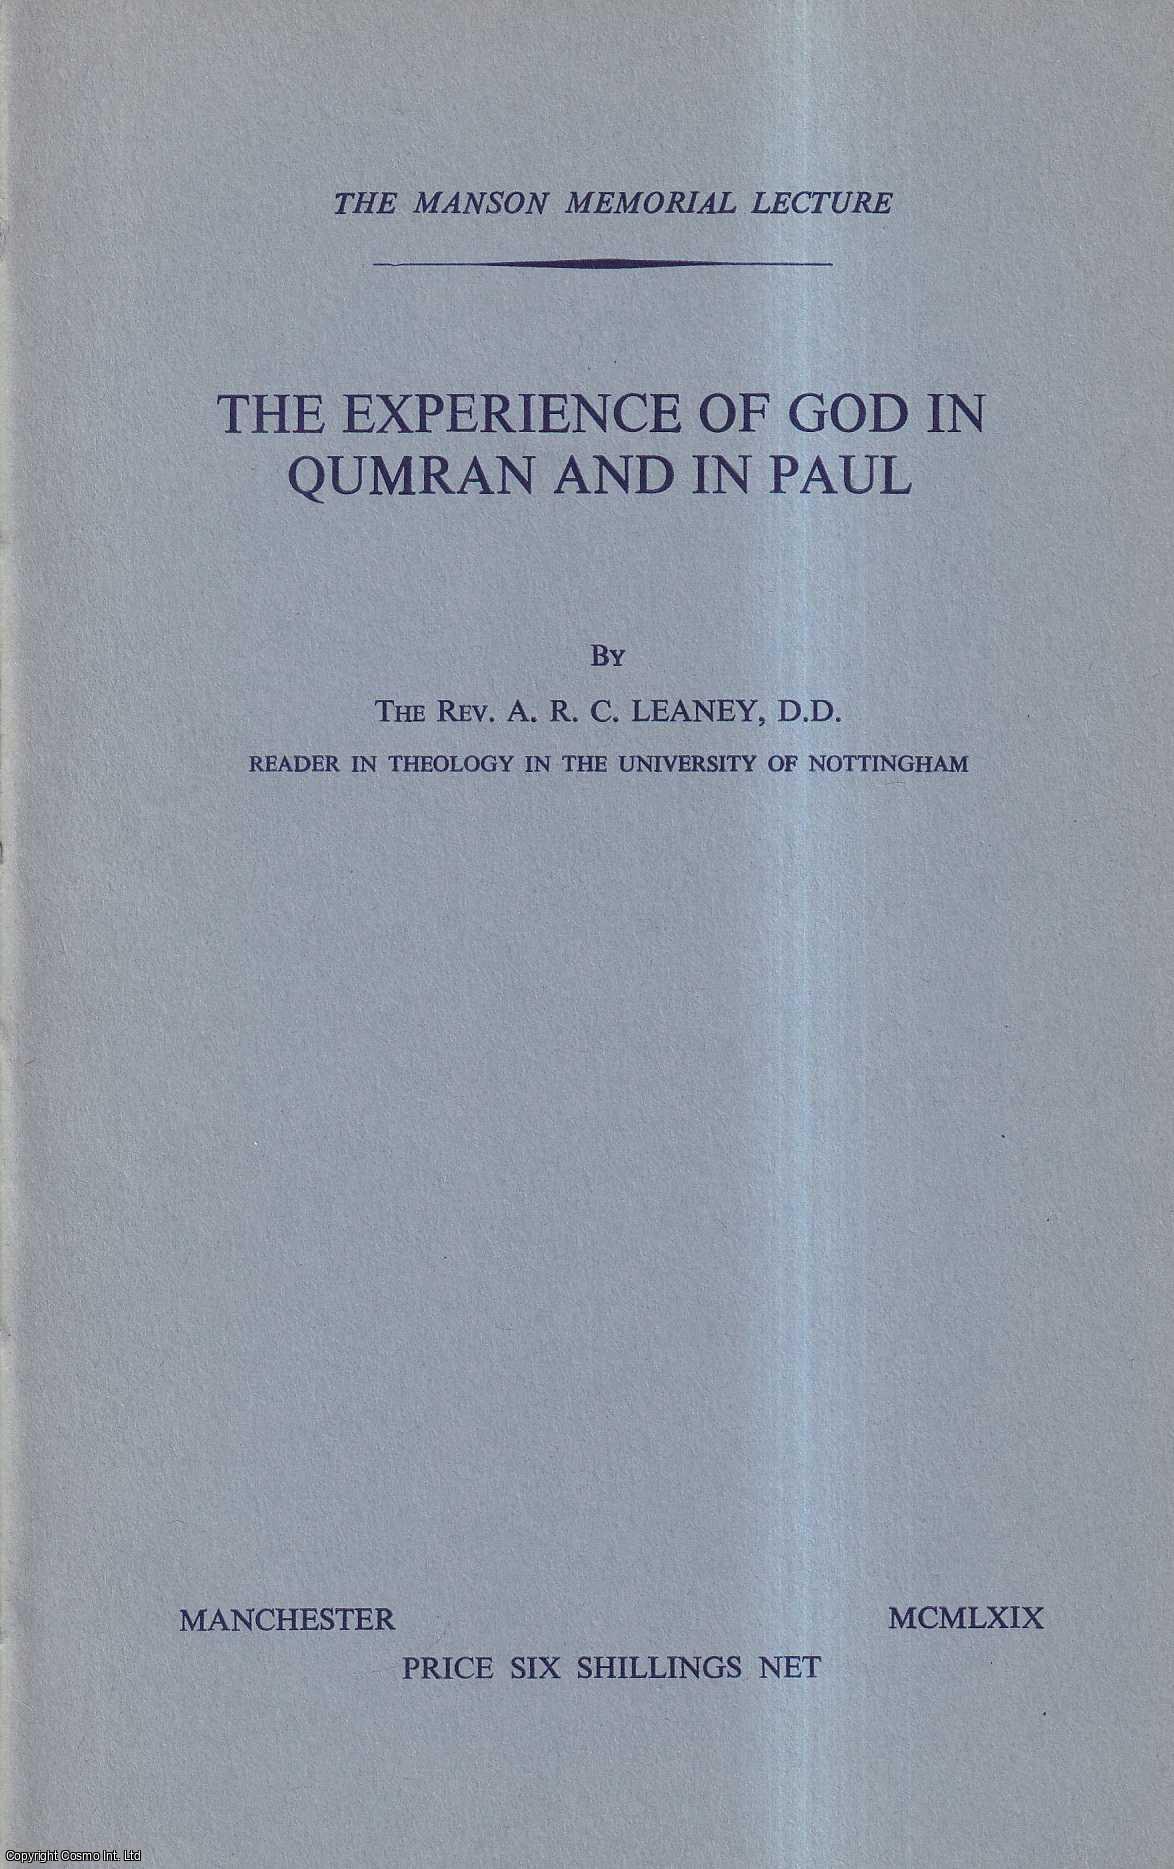 Rev. A.R.C. Leaney - The Experience of God in Qumran and in Paul. Reprinted from the Bulletin of the John Rylands Library.